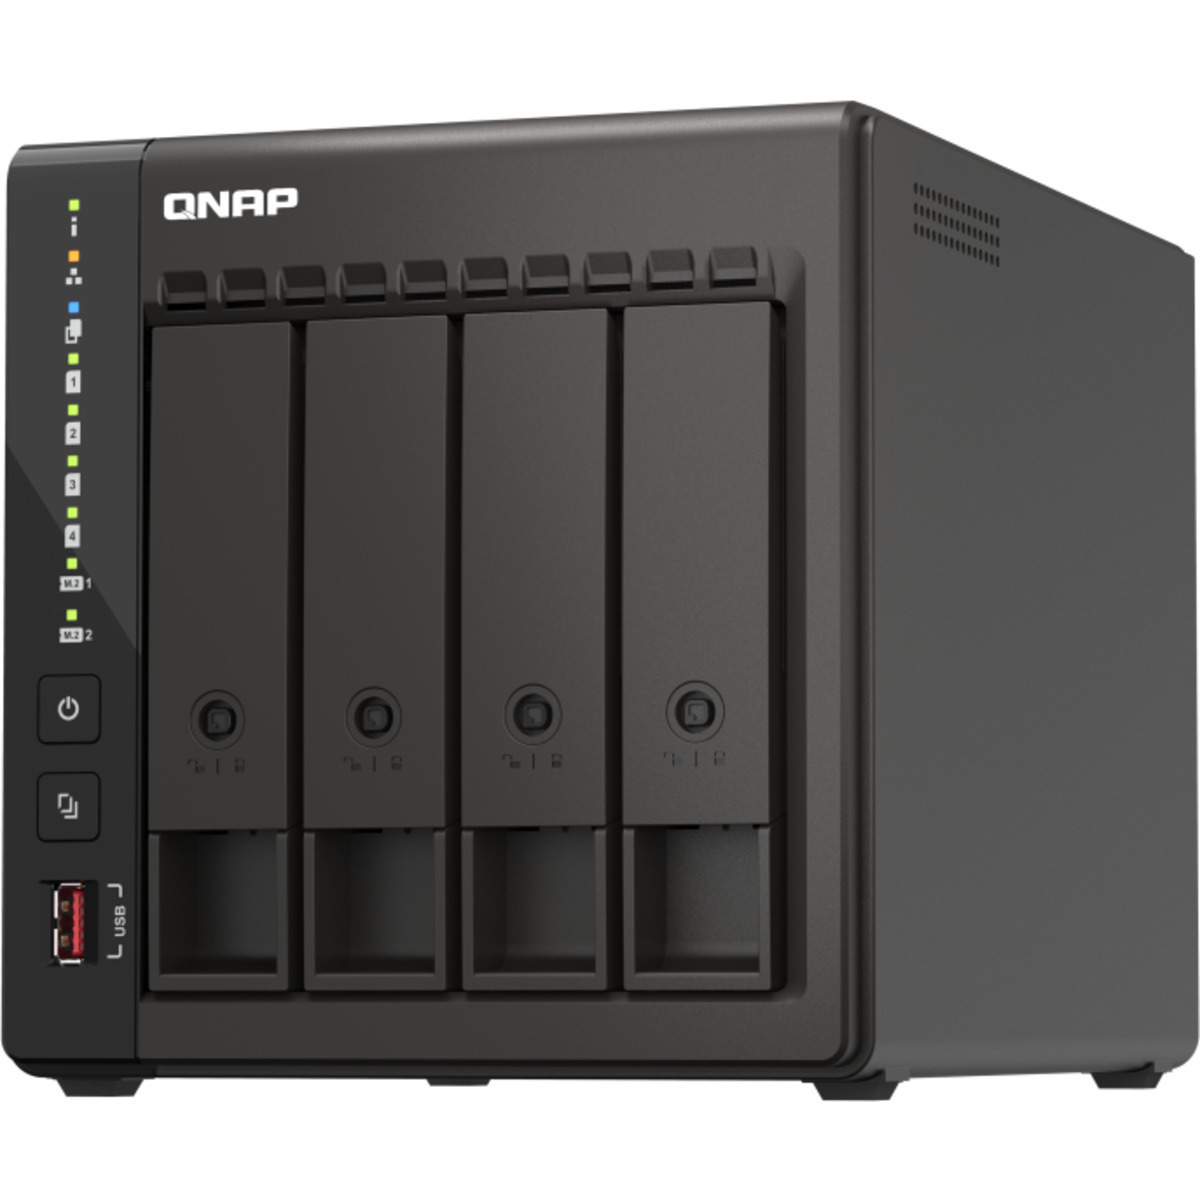 buy $1857 QNAP TS-453E 16tb Desktop NAS - Network Attached Storage Device 4x4000gb Samsung 870 EVO MZ-77E4T0BAM 2.5 560/530MB/s SATA 6Gb/s SSD CONSUMER Class Drives Installed - Burn-In Tested - nas headquarters buy network attached storage server device das new raid-5 free shipping simply usa TS-453E